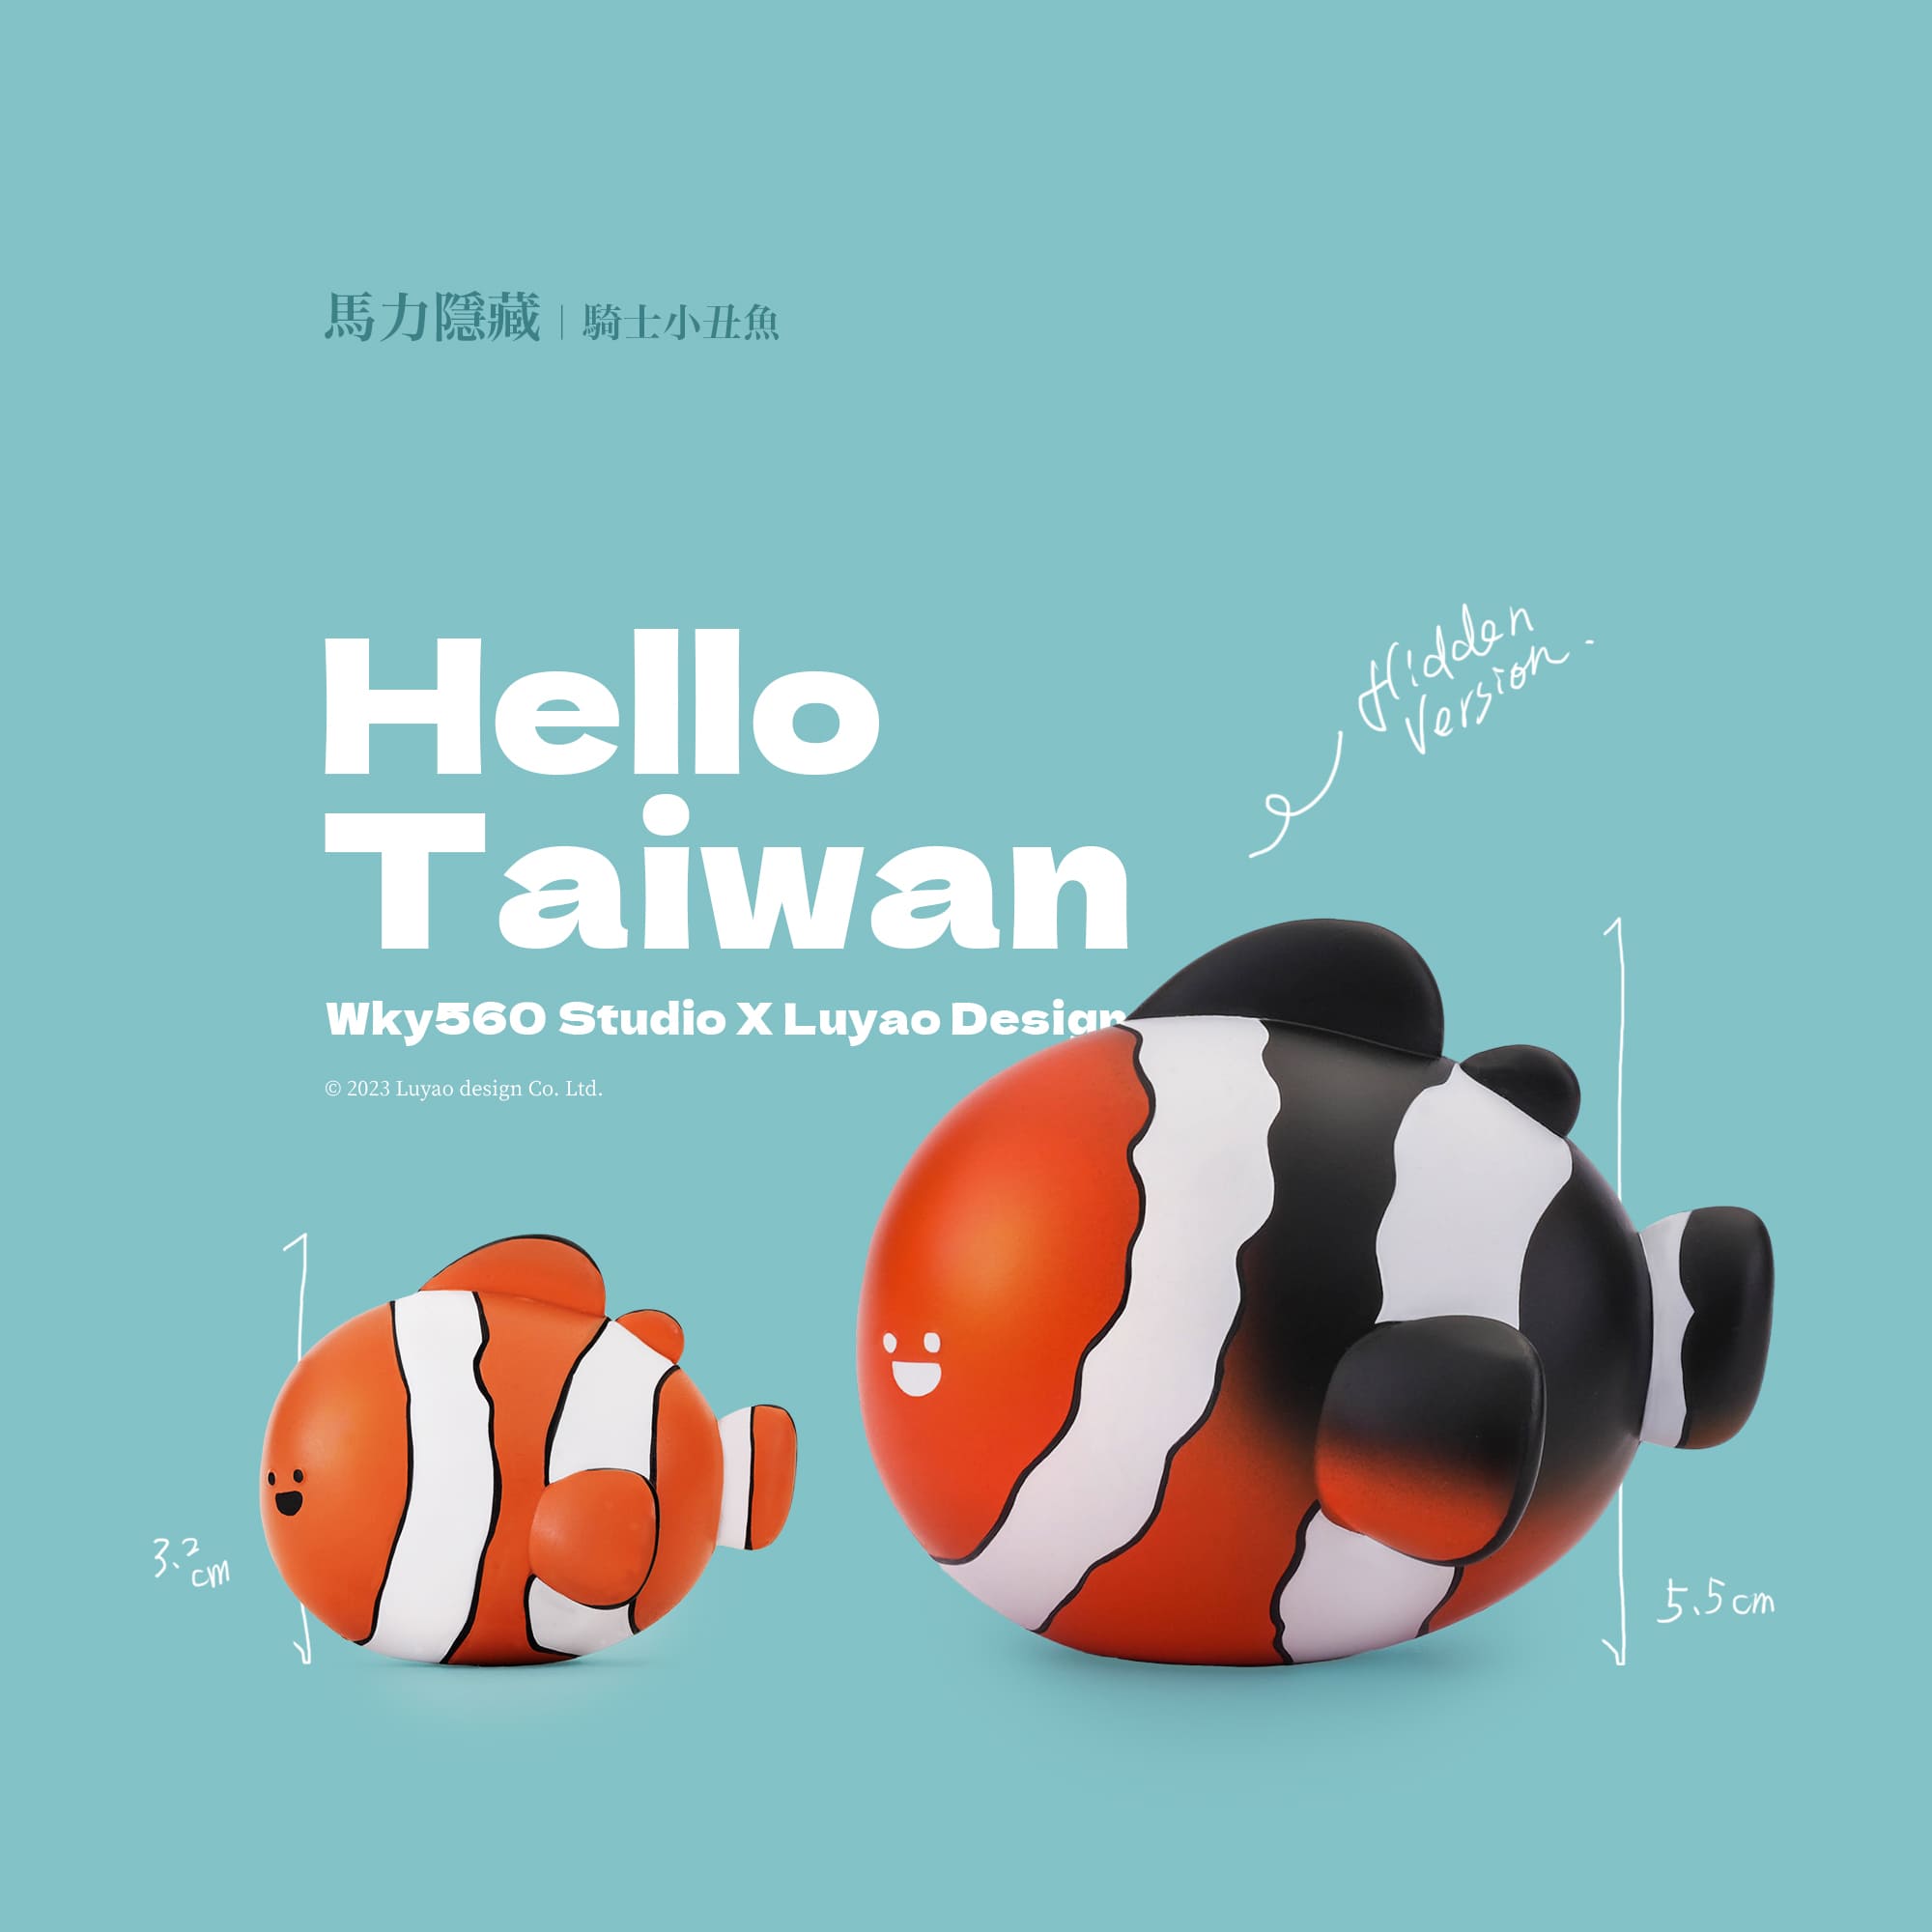 A blind box toy: Horsepower Hidden Edition - helloTaiwan Ocean Series, featuring two fish models in PVC, approximately 5.5cm tall.